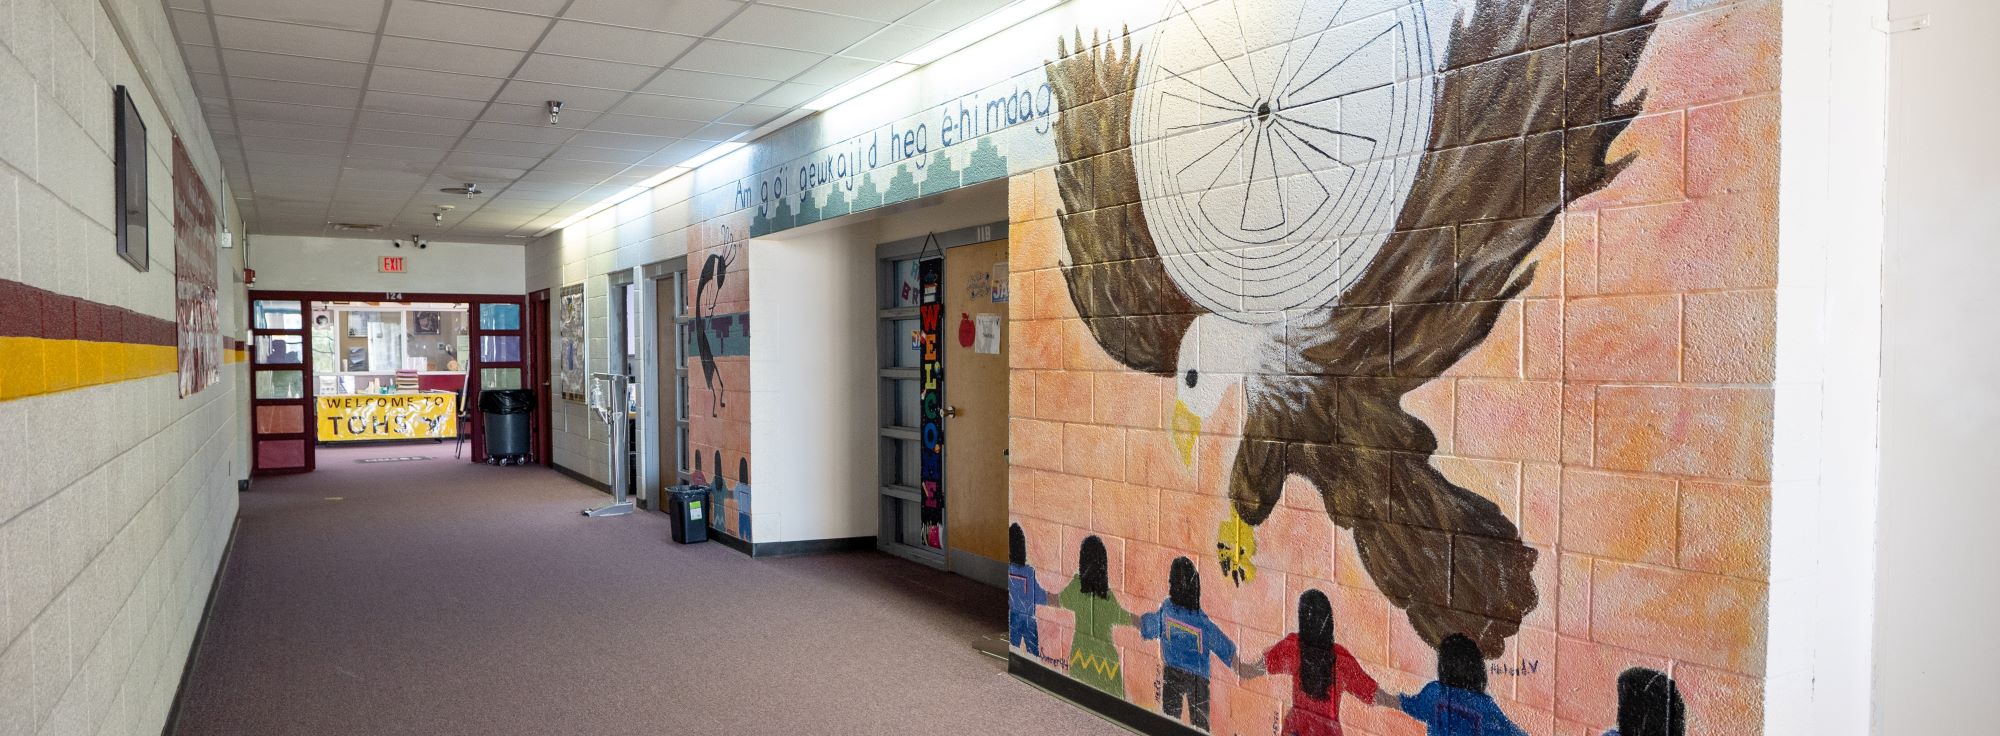 hallway mural large eagle in flight and children holding hands